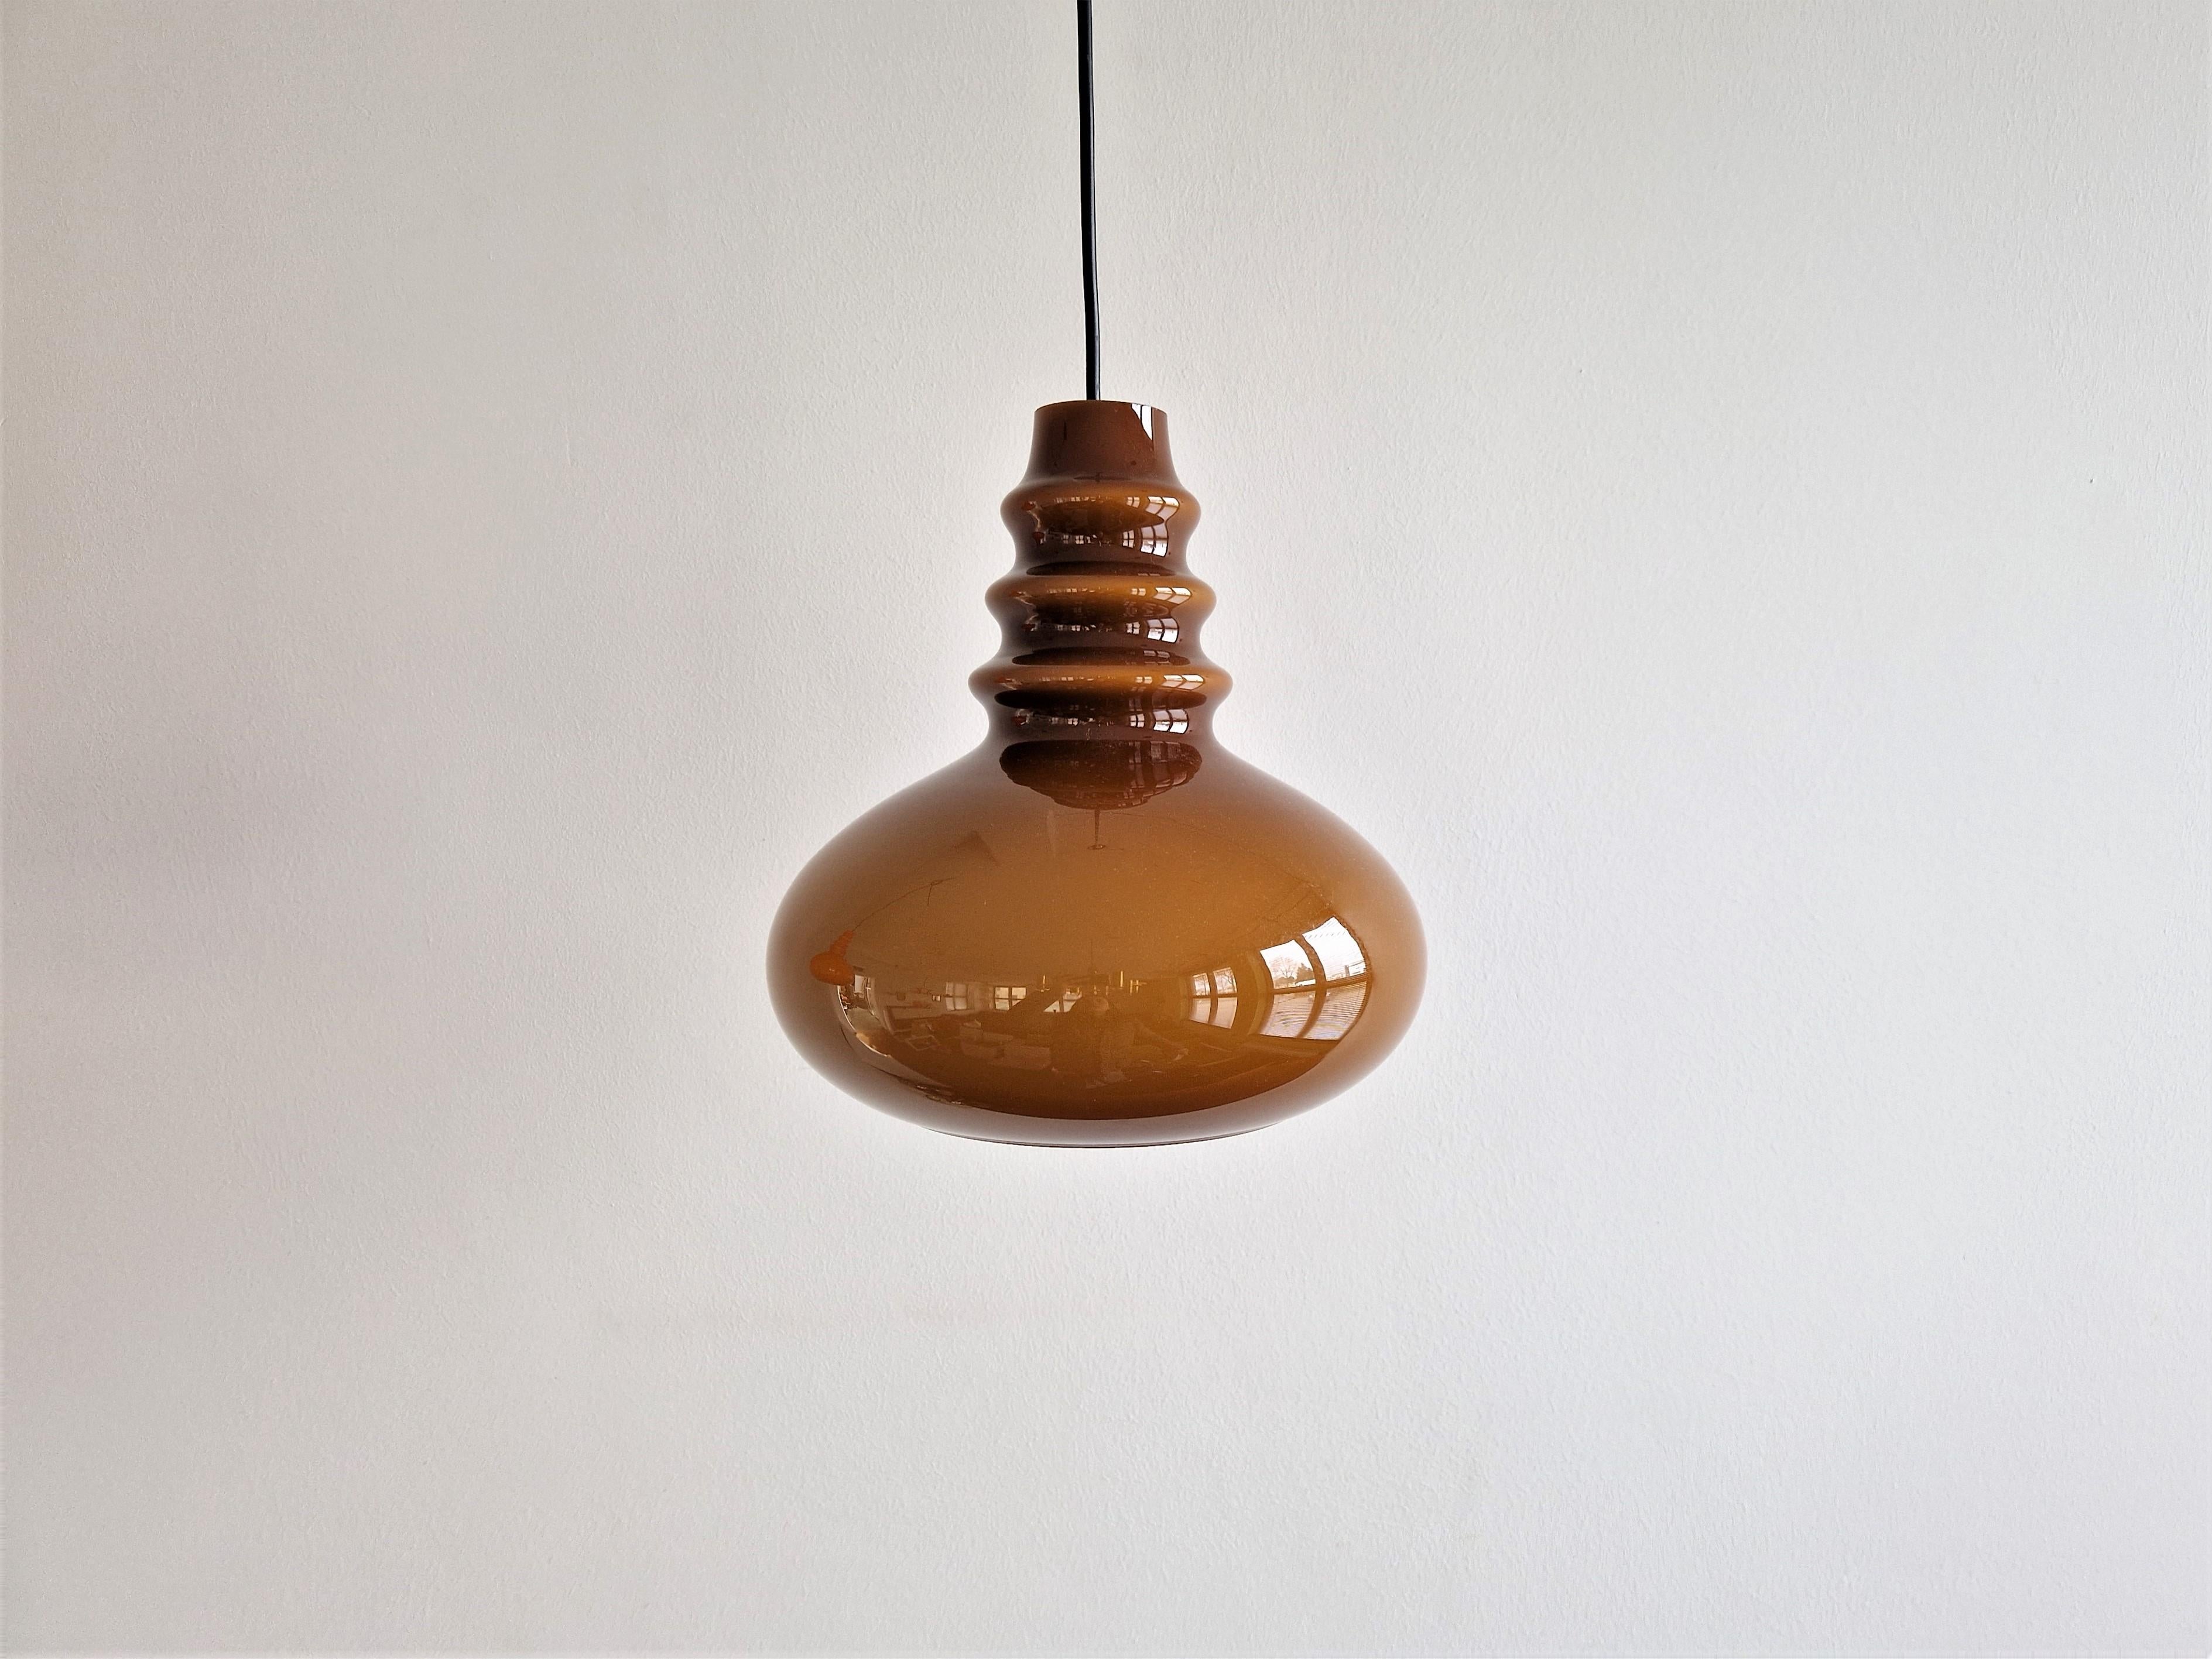 This pendant lamp in a beautiful retro shape and form was made by the German manufacturer Peill & Putzler. It is made of double-layerd hand blown Murano glass with an brown outside and an opal white inside. When lit it creates a warm and atmospheric